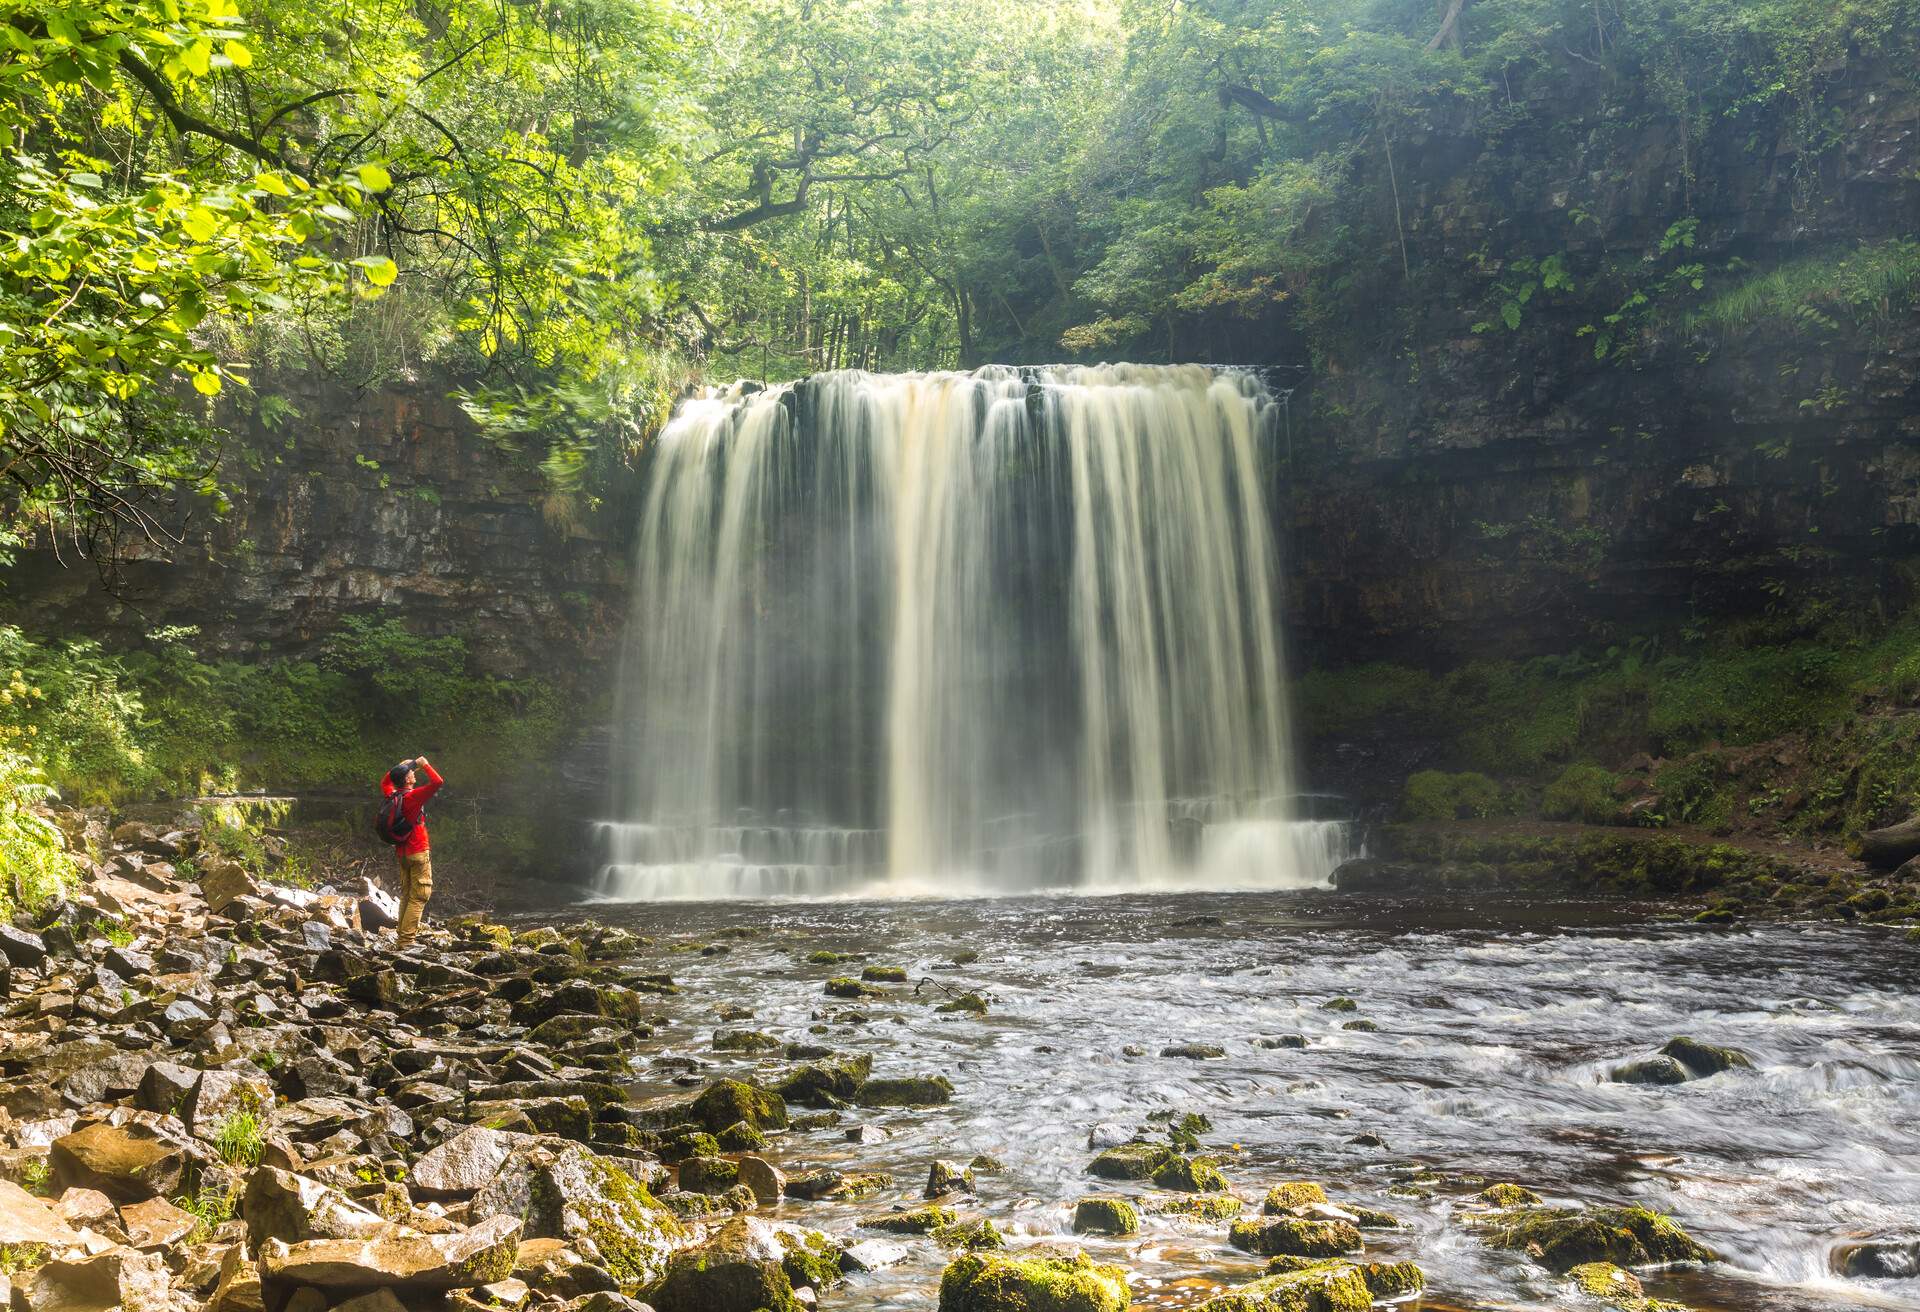 DEST_UK_WALES_BRECON-BEACONS_Sgwd-yr-Eira-Waterfall_GettyImages-1313440260